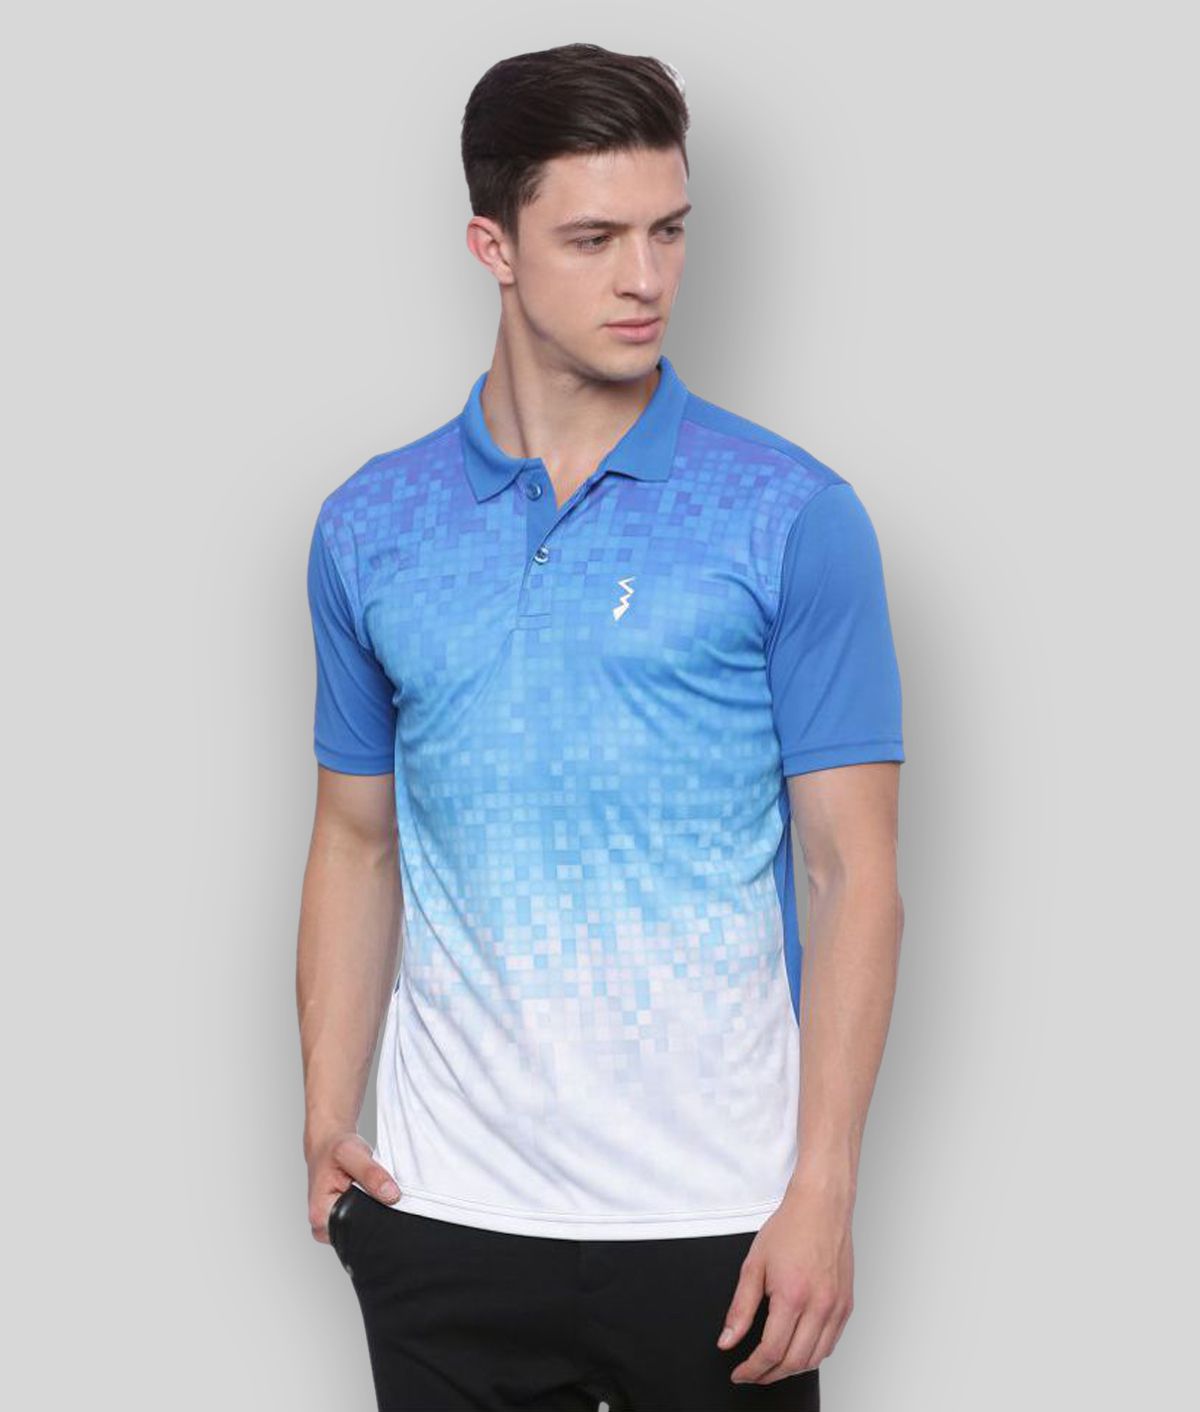     			Campus Sutra Blue Polyester Polo T-Shirt Single Pack